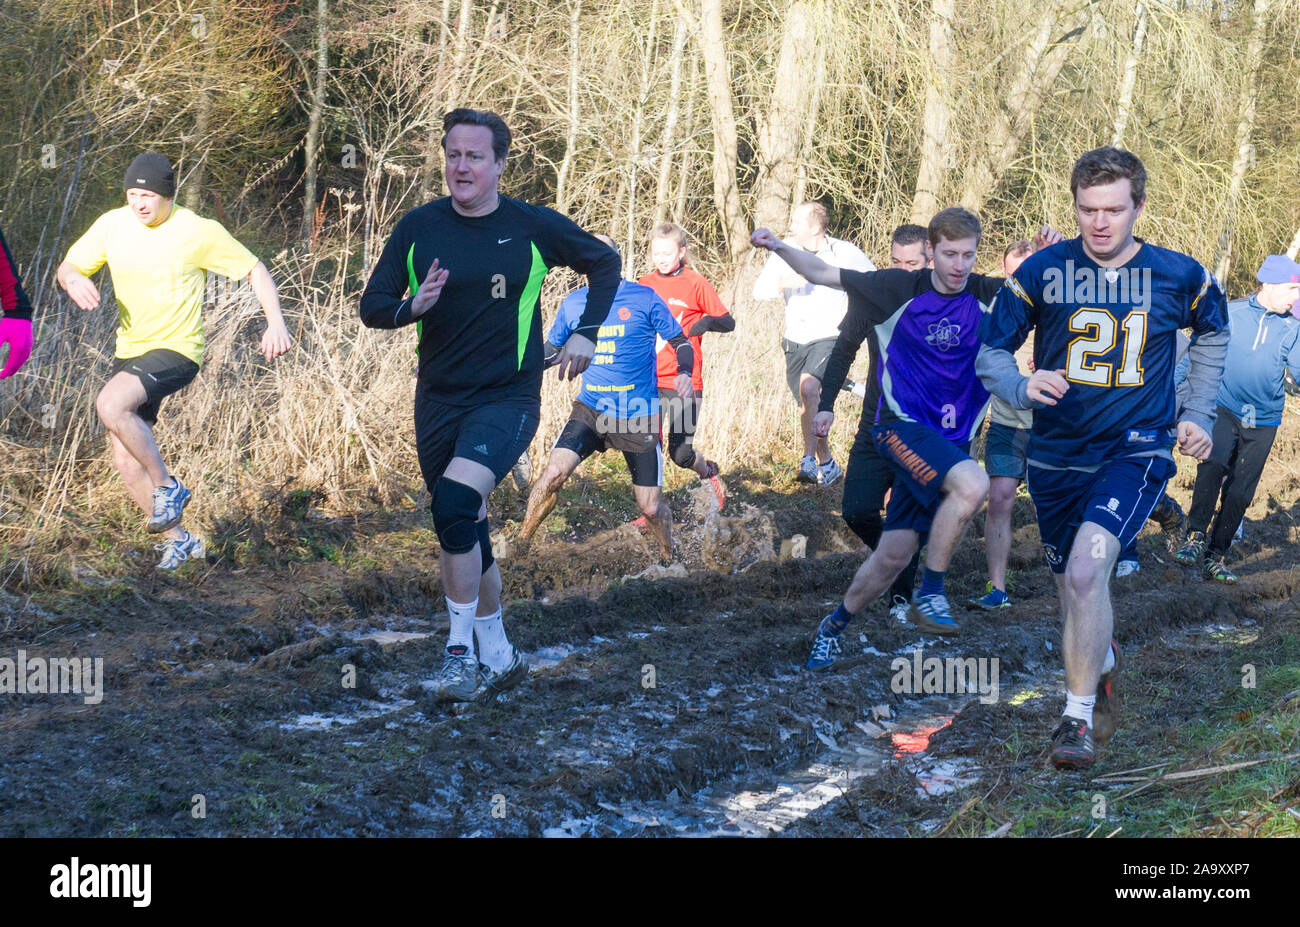 The Prime Minister David Cameron competing in the Great Brook Run in his Witney constituency village of Chadlington in December 2014. The Great Brook Run is an annual mile-long cross country run following  a path along the village stream called Coldron Brook passing through a 3-foot tunnel under a bridge. Stock Photo